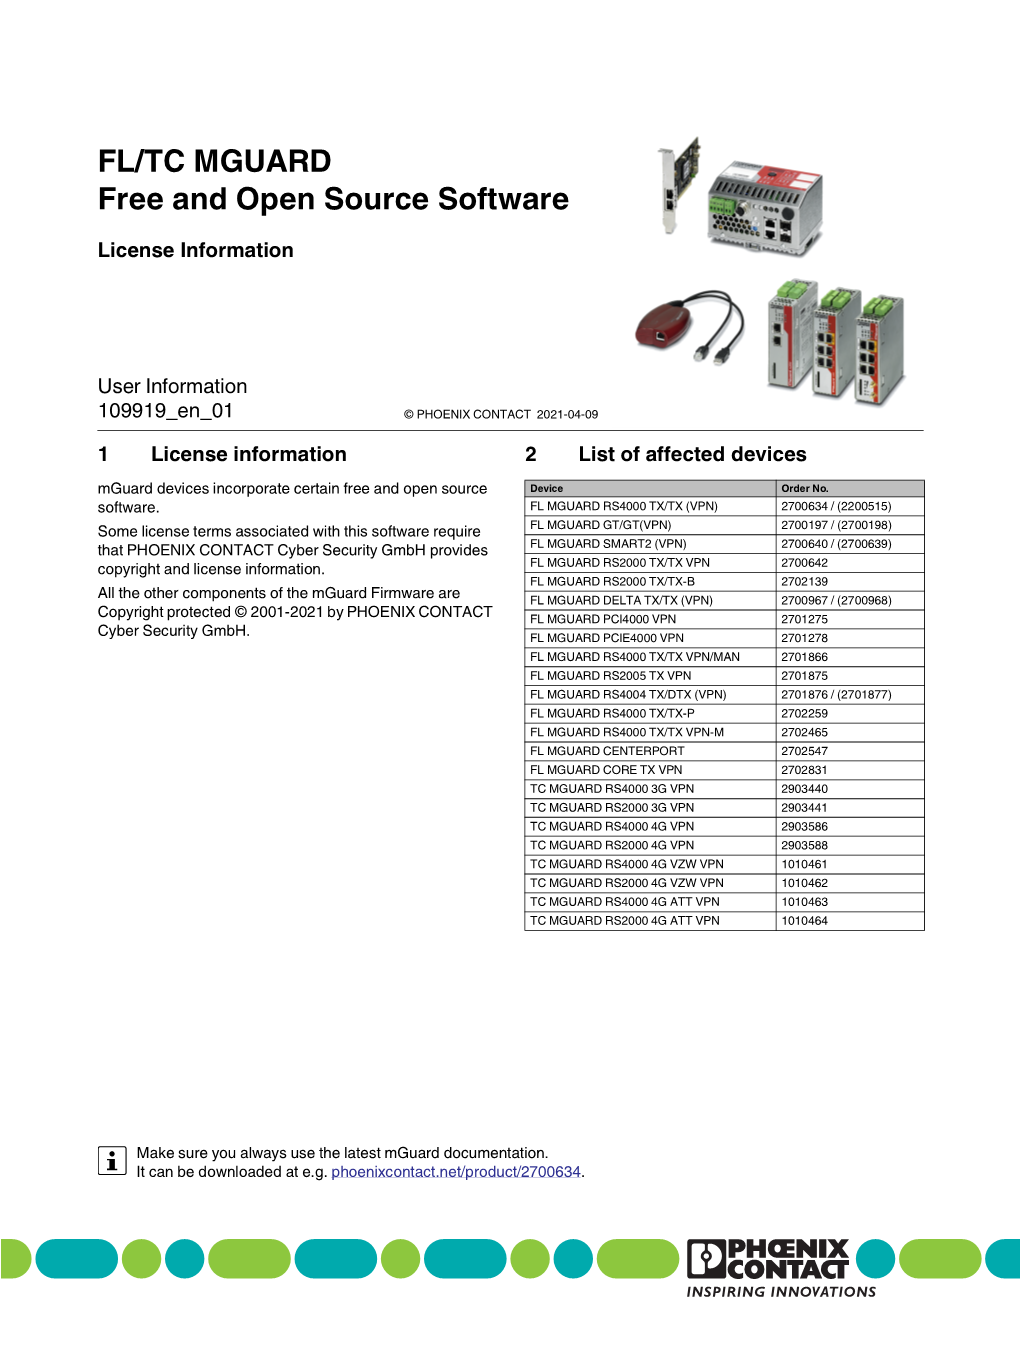 FL/TC MGUARD Free and Open Source Software